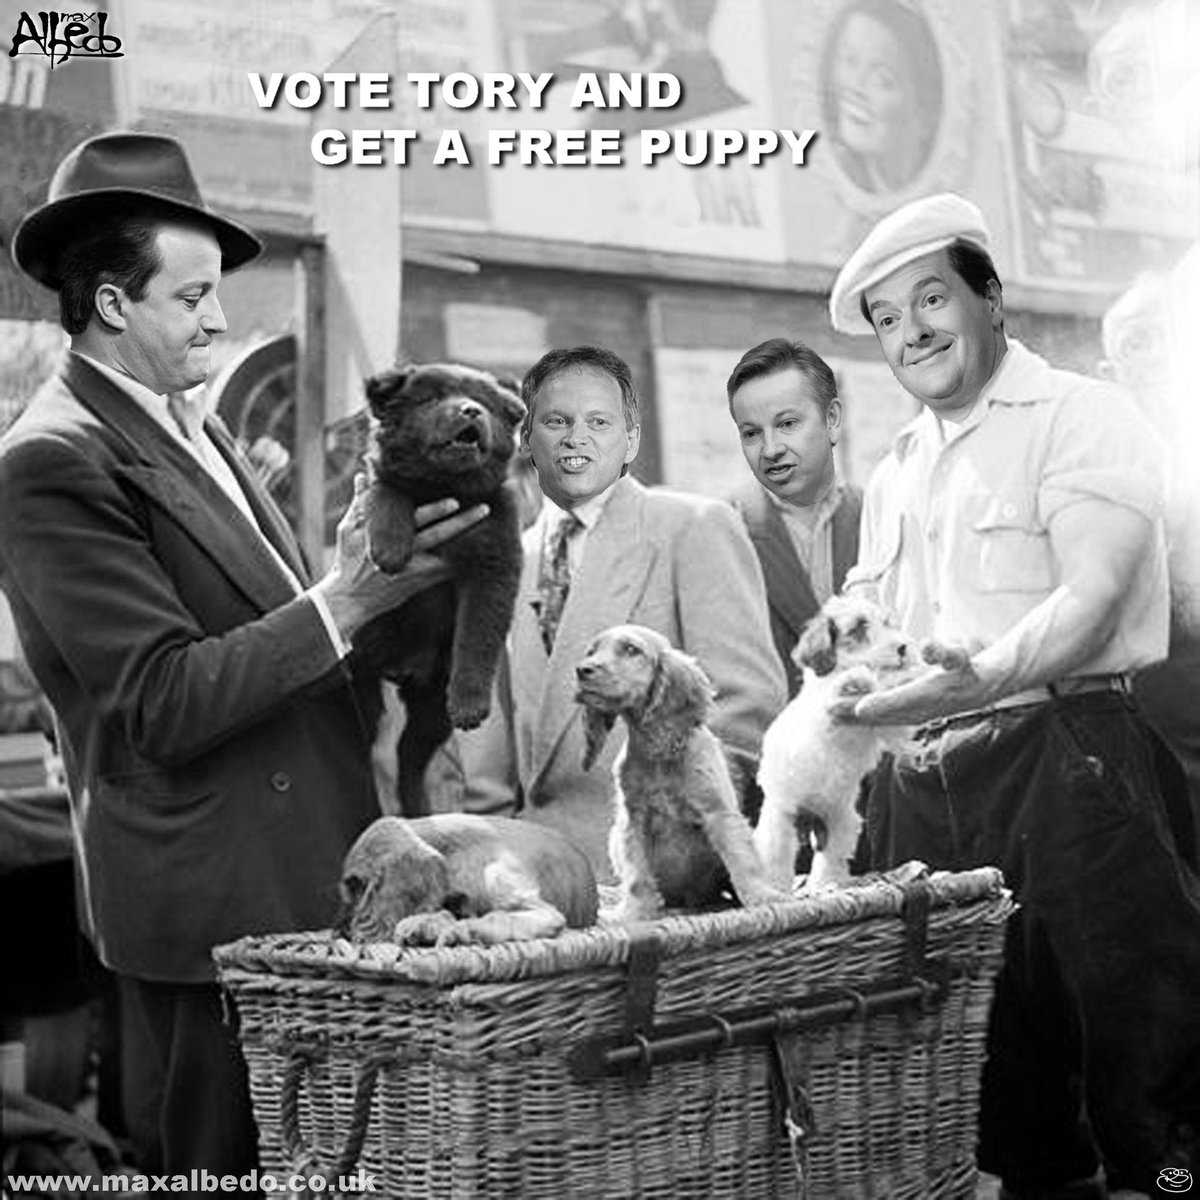 Wednesday - must be another Tory false promise #Labour #uksatire #GE2015 #funnyimages #bbcdp #wato #Milibrand